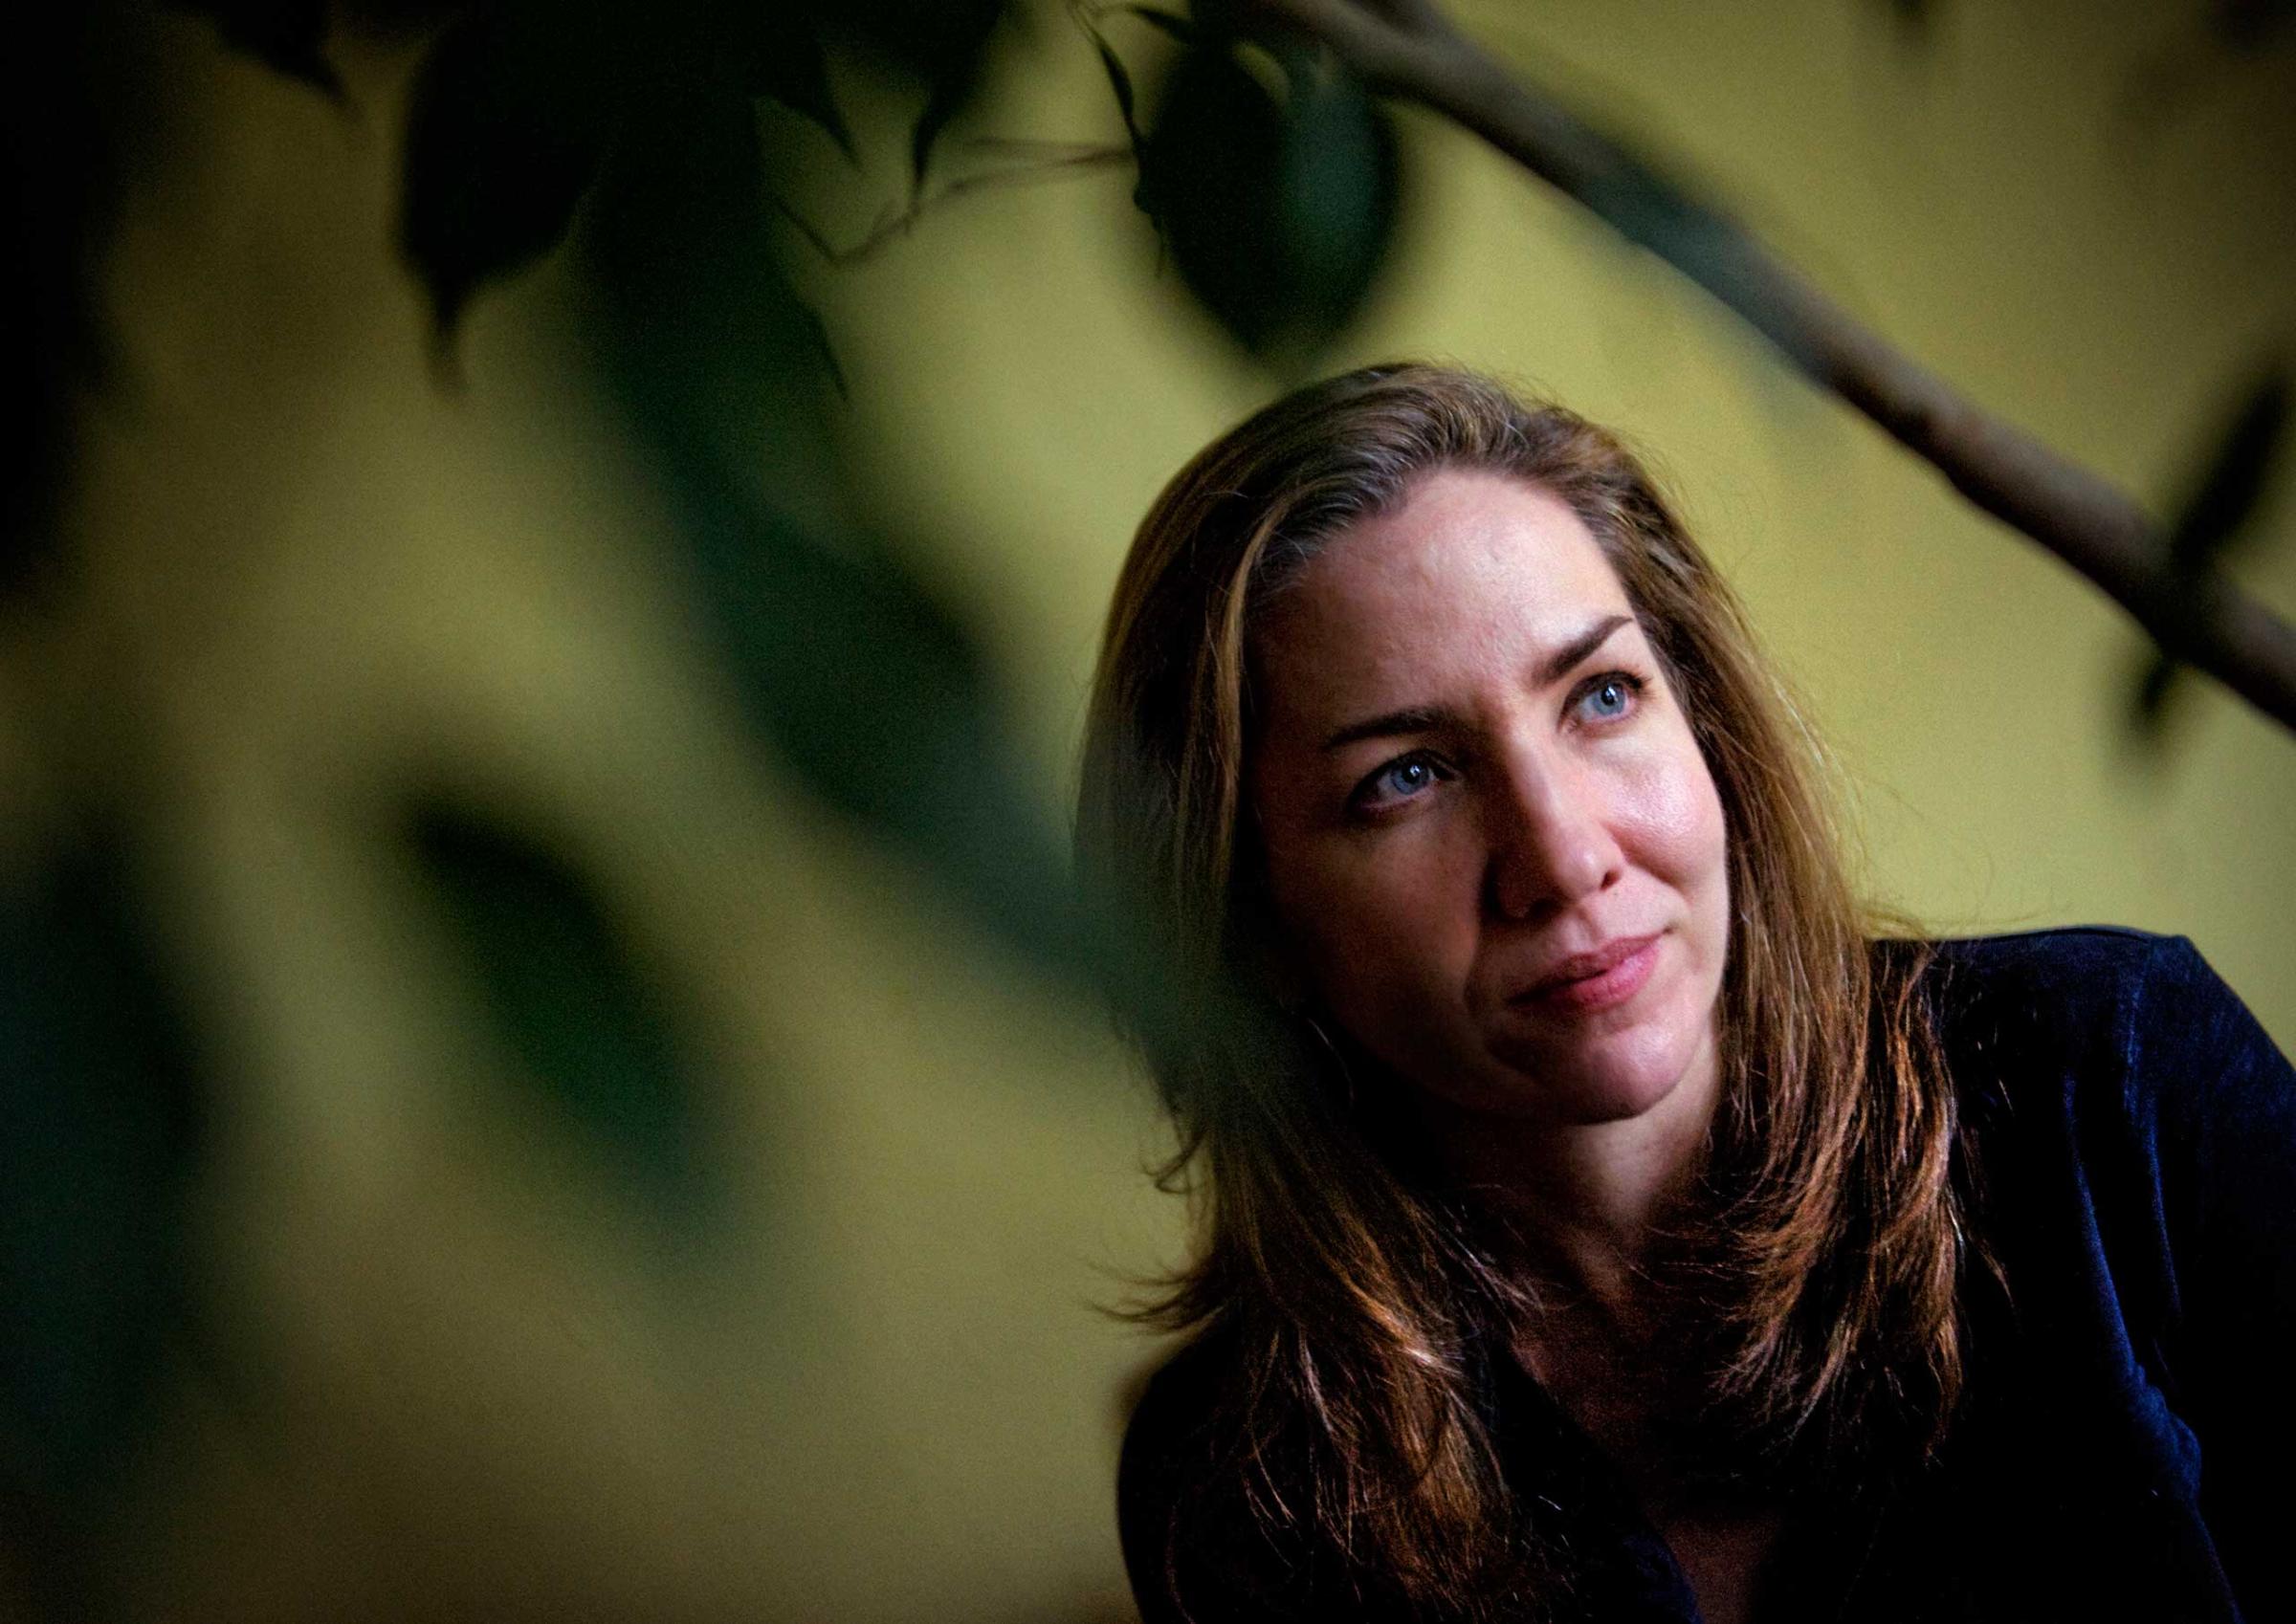 Laura Hillenbrand,  whose latest book "Unbroken" has just come out, in her home in Washington, DC.